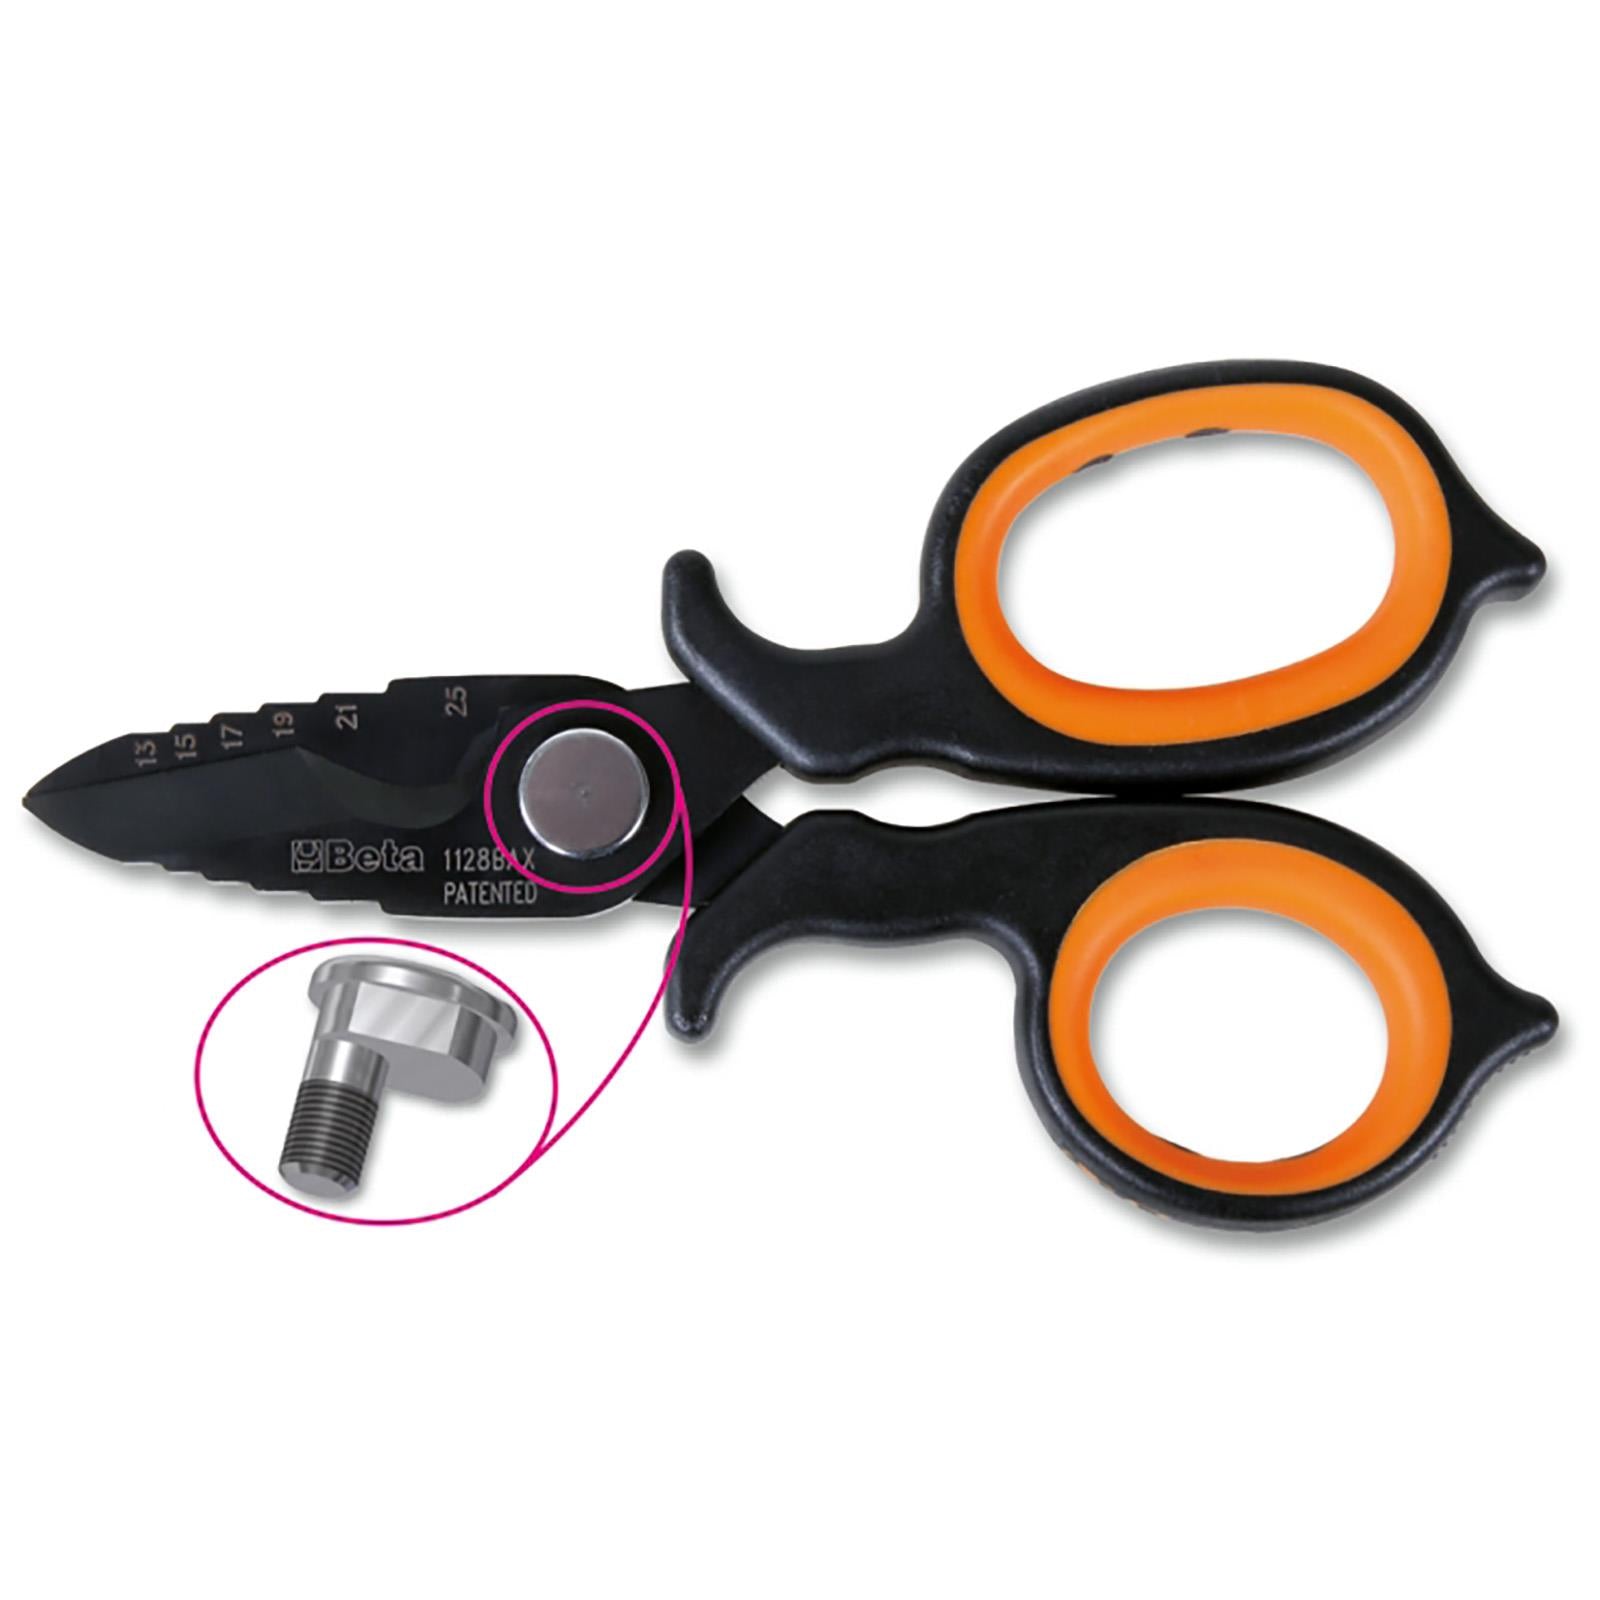 Beta Double Acting Electricians Scissors DLC Diamond Like Carbon Stainless Steel 150mm 1128BAX